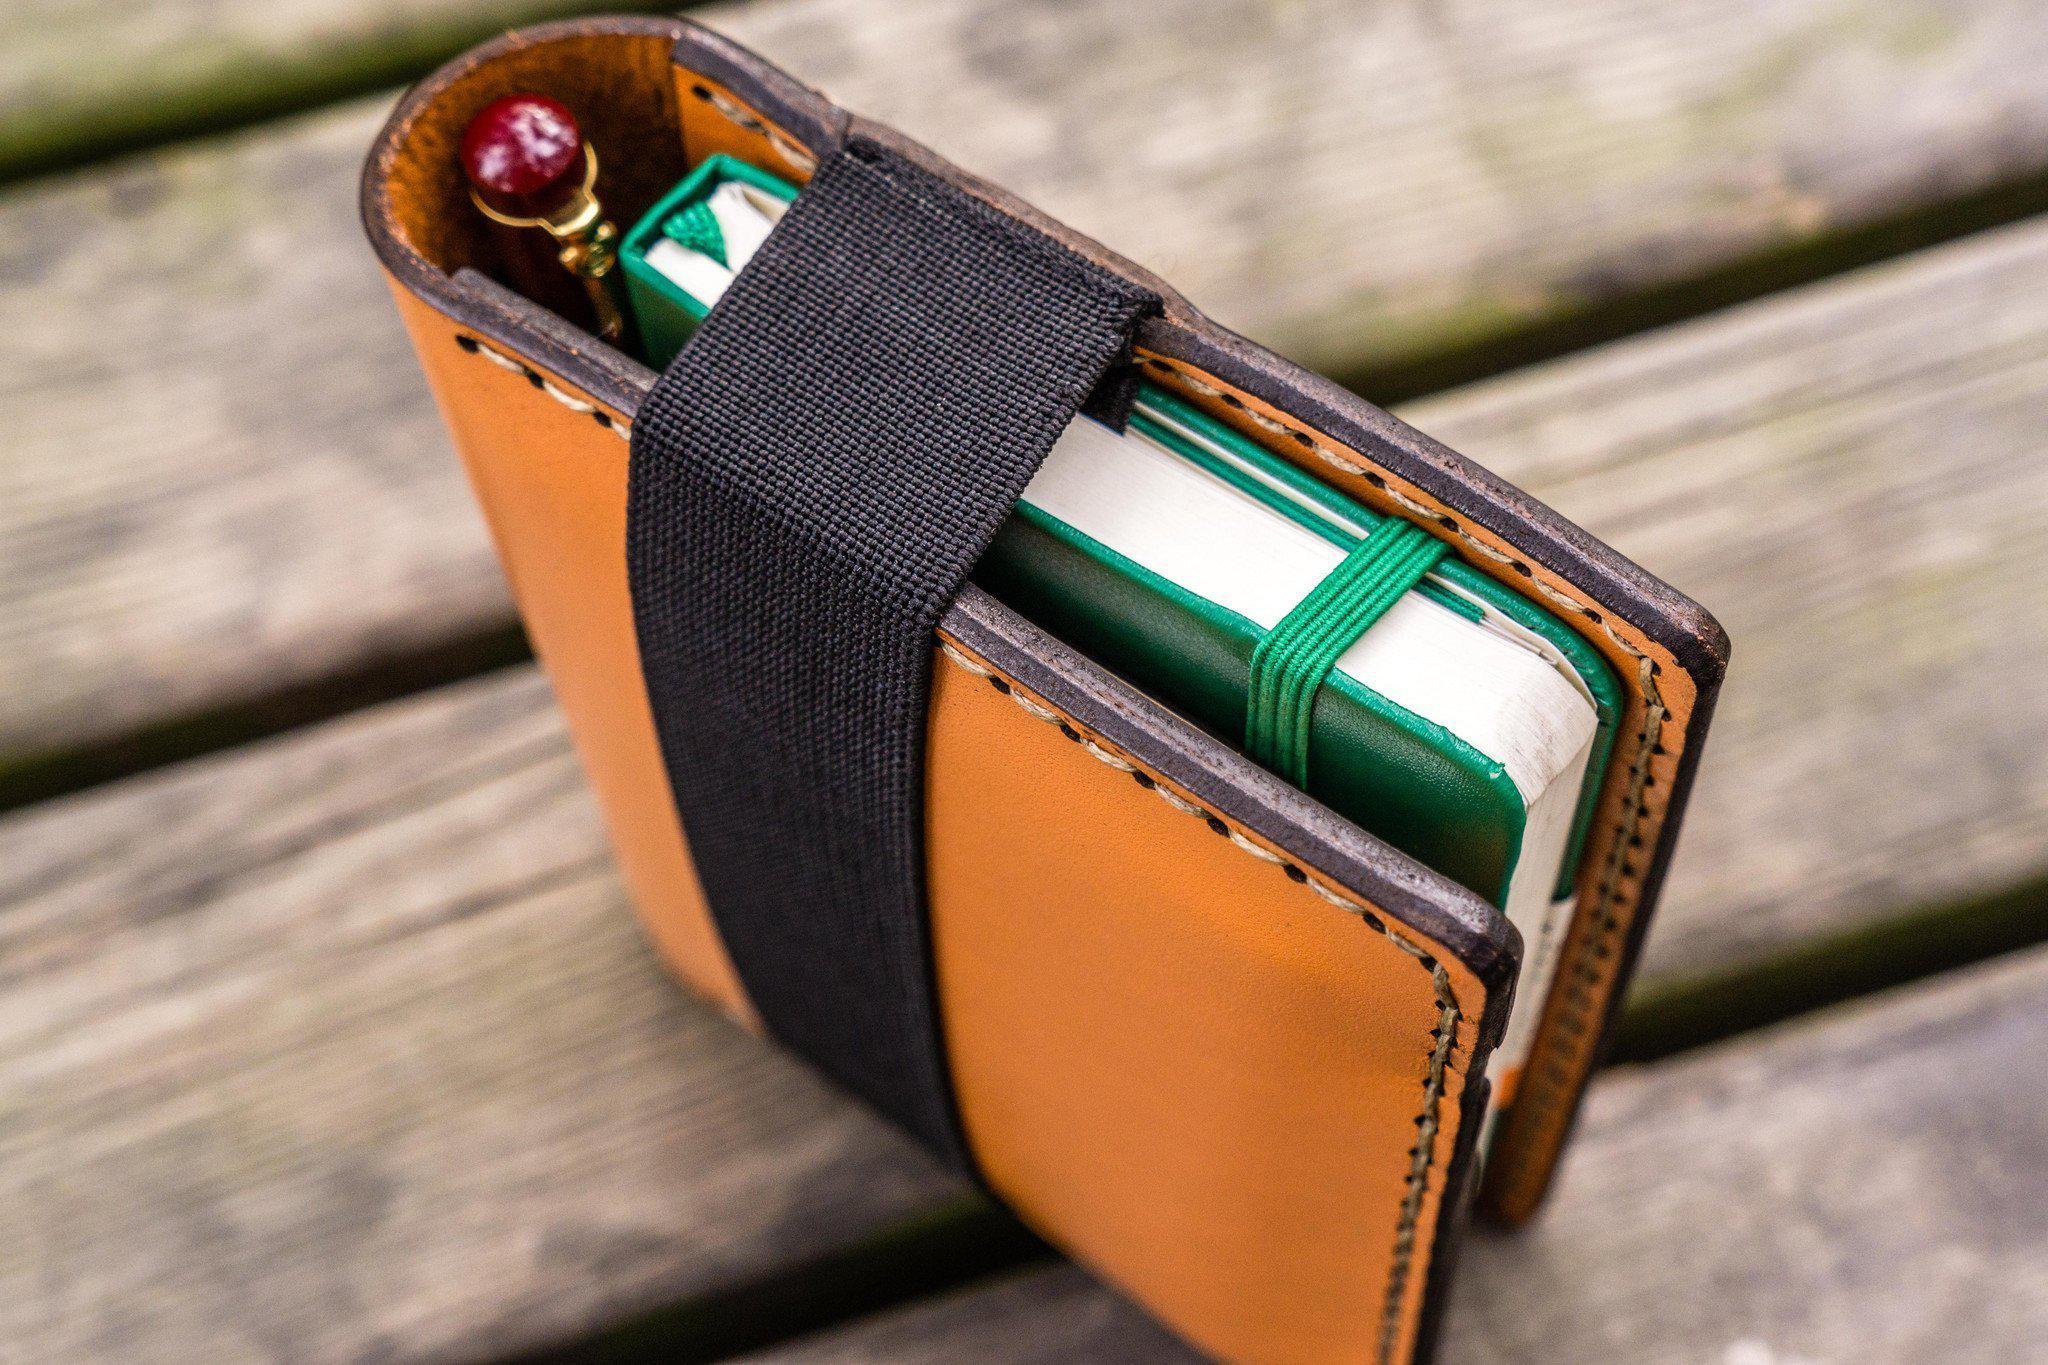 Journal Girdle, a pencil case that attaches to your notebook cover, Bright